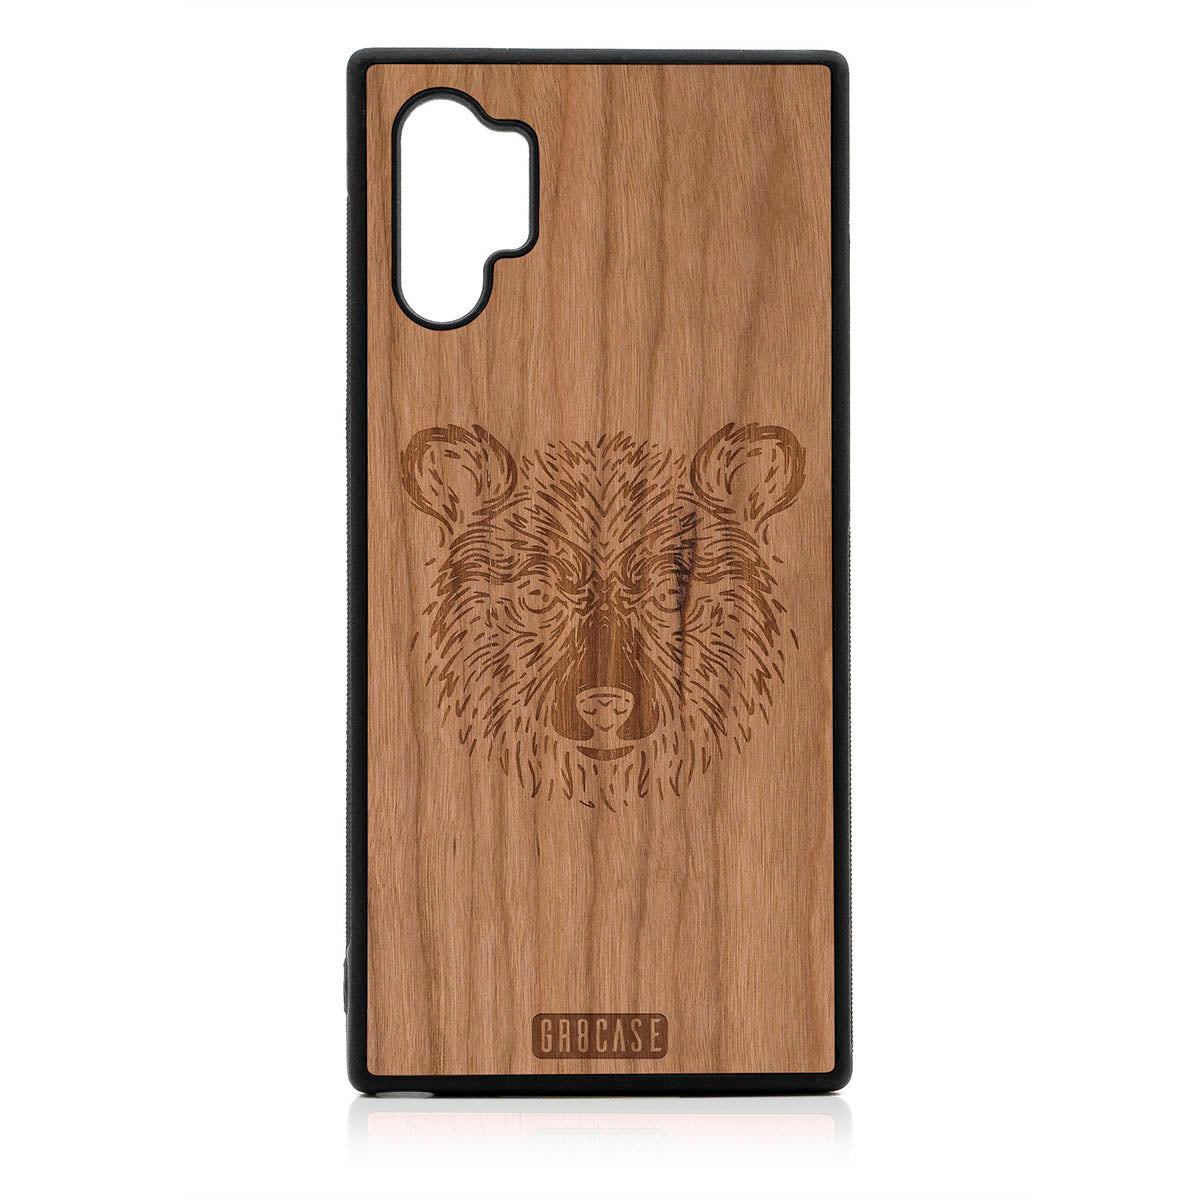 Furry Bear Design Wood Case For Samsung Galaxy Note 10 Plus